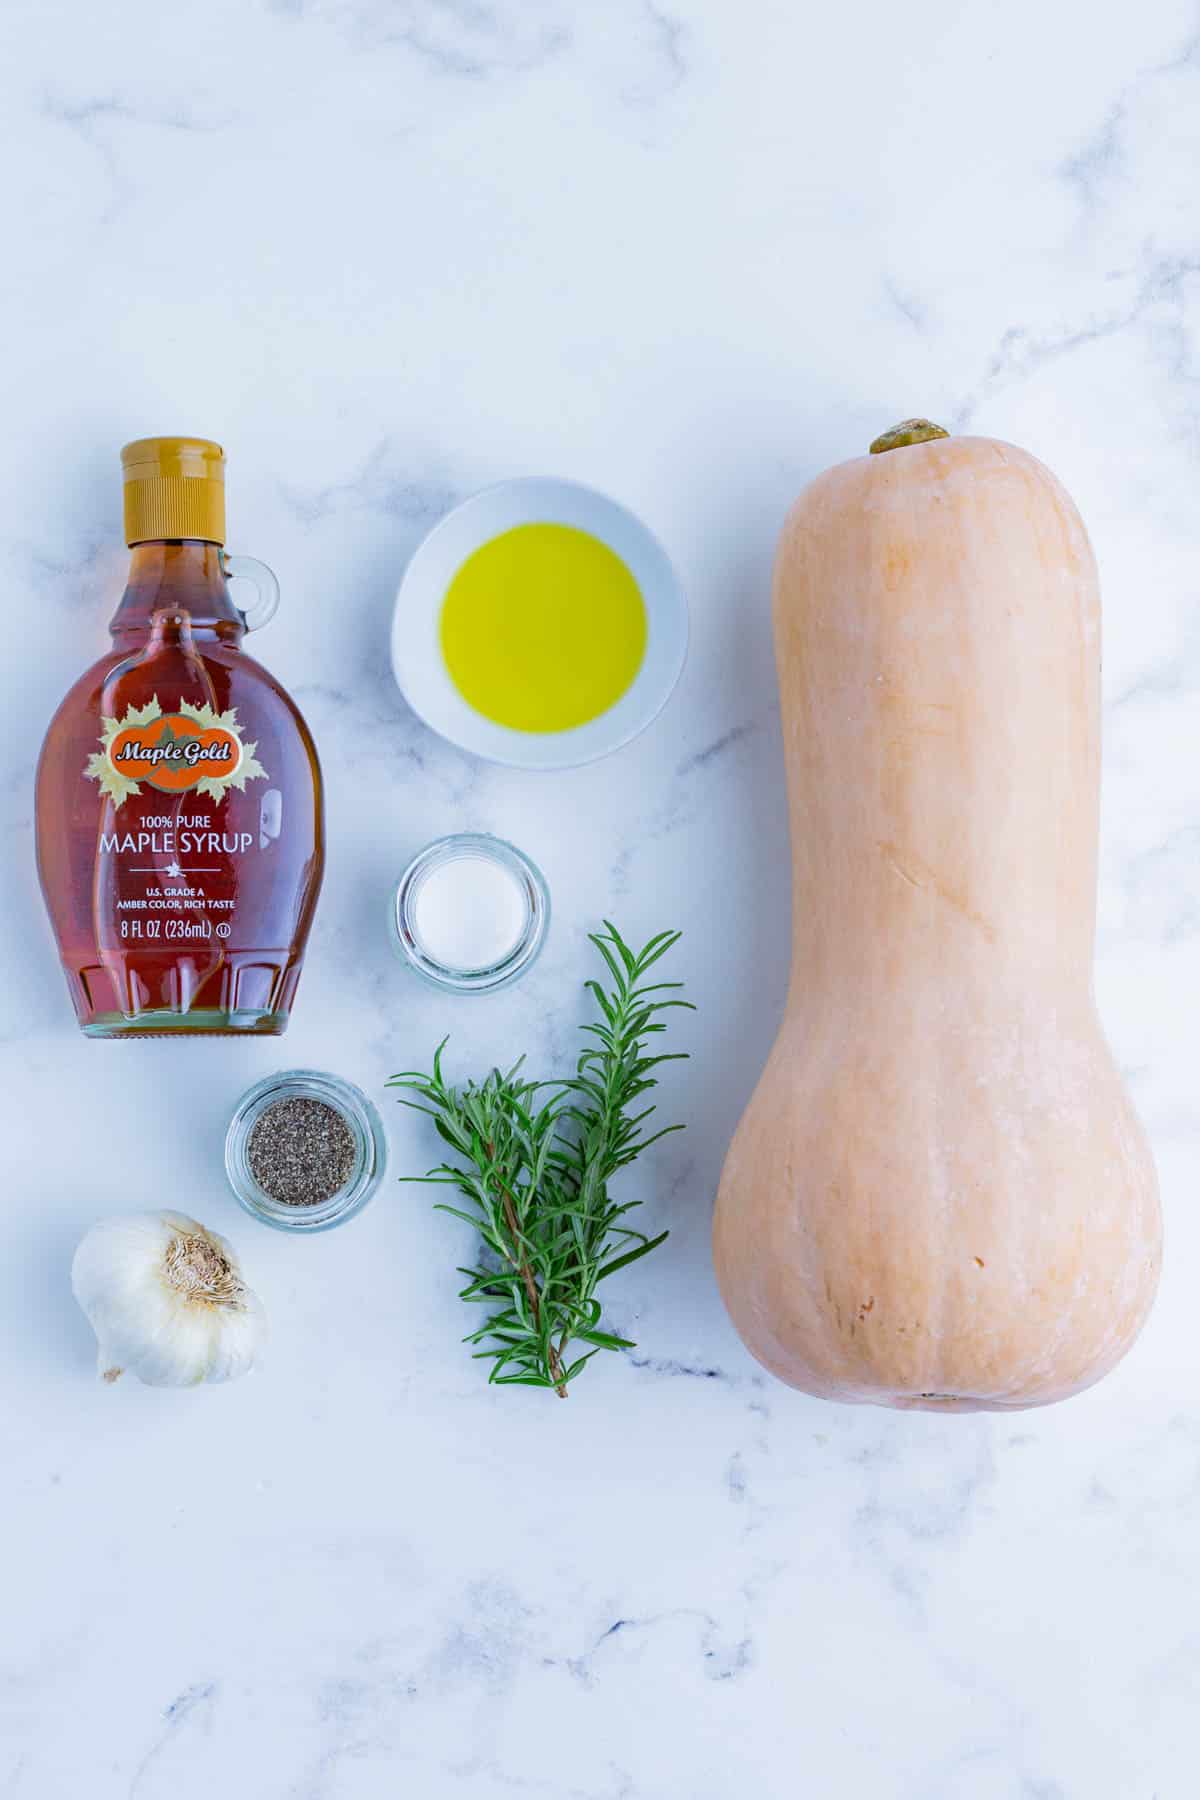 Butternut squash, oil, and seasonings are the ingredients for this dish.